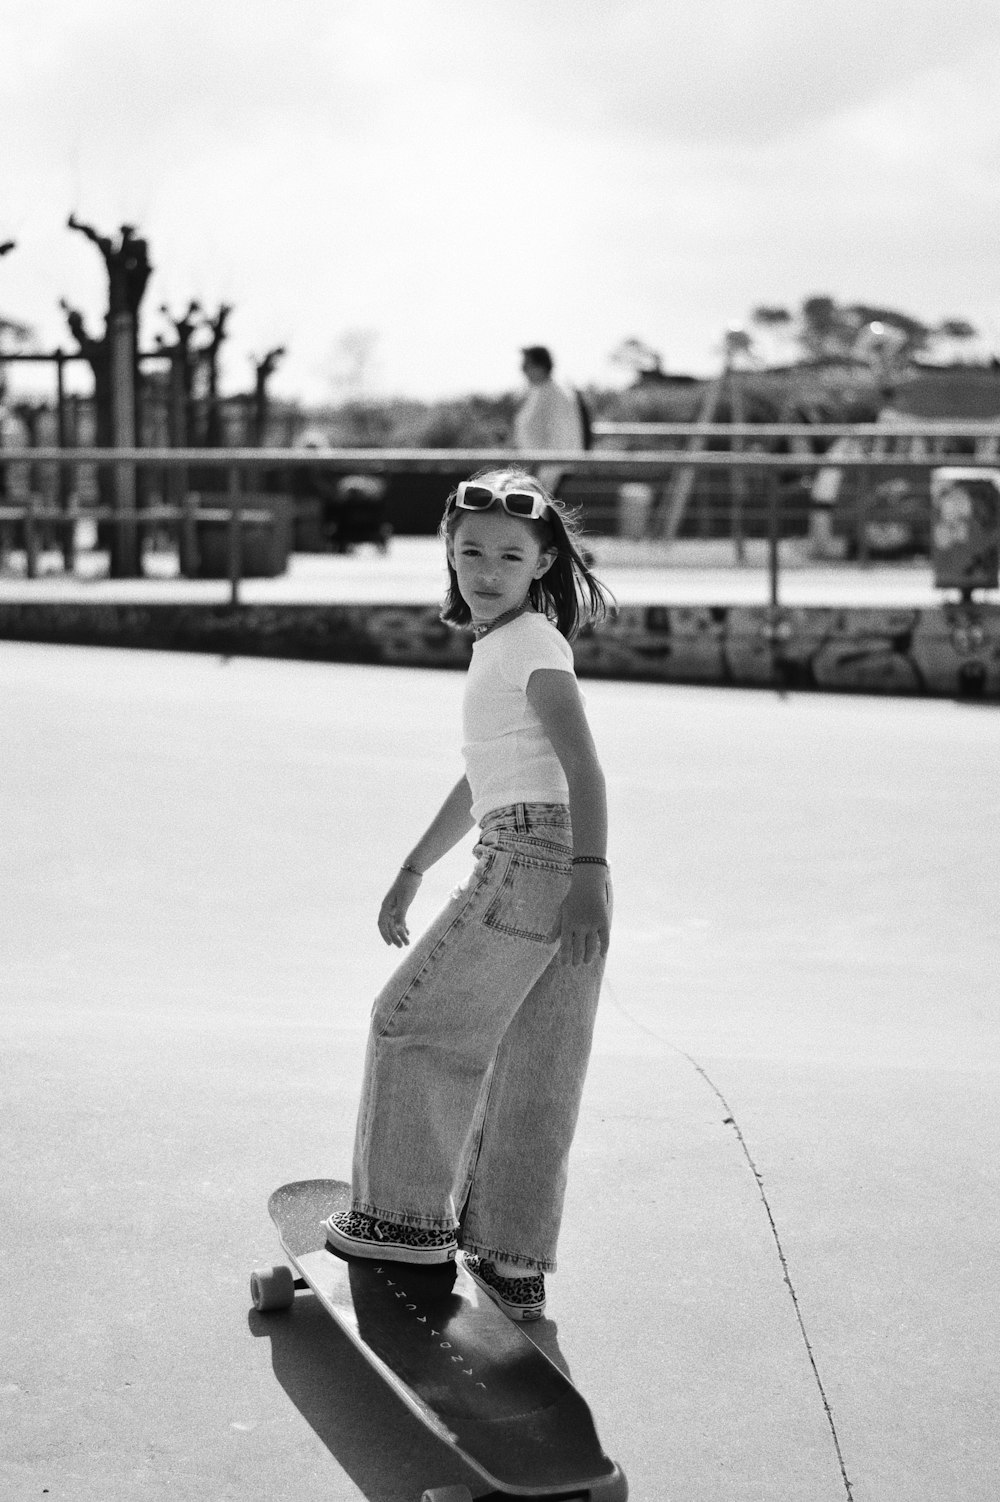 a girl skating on the pavement